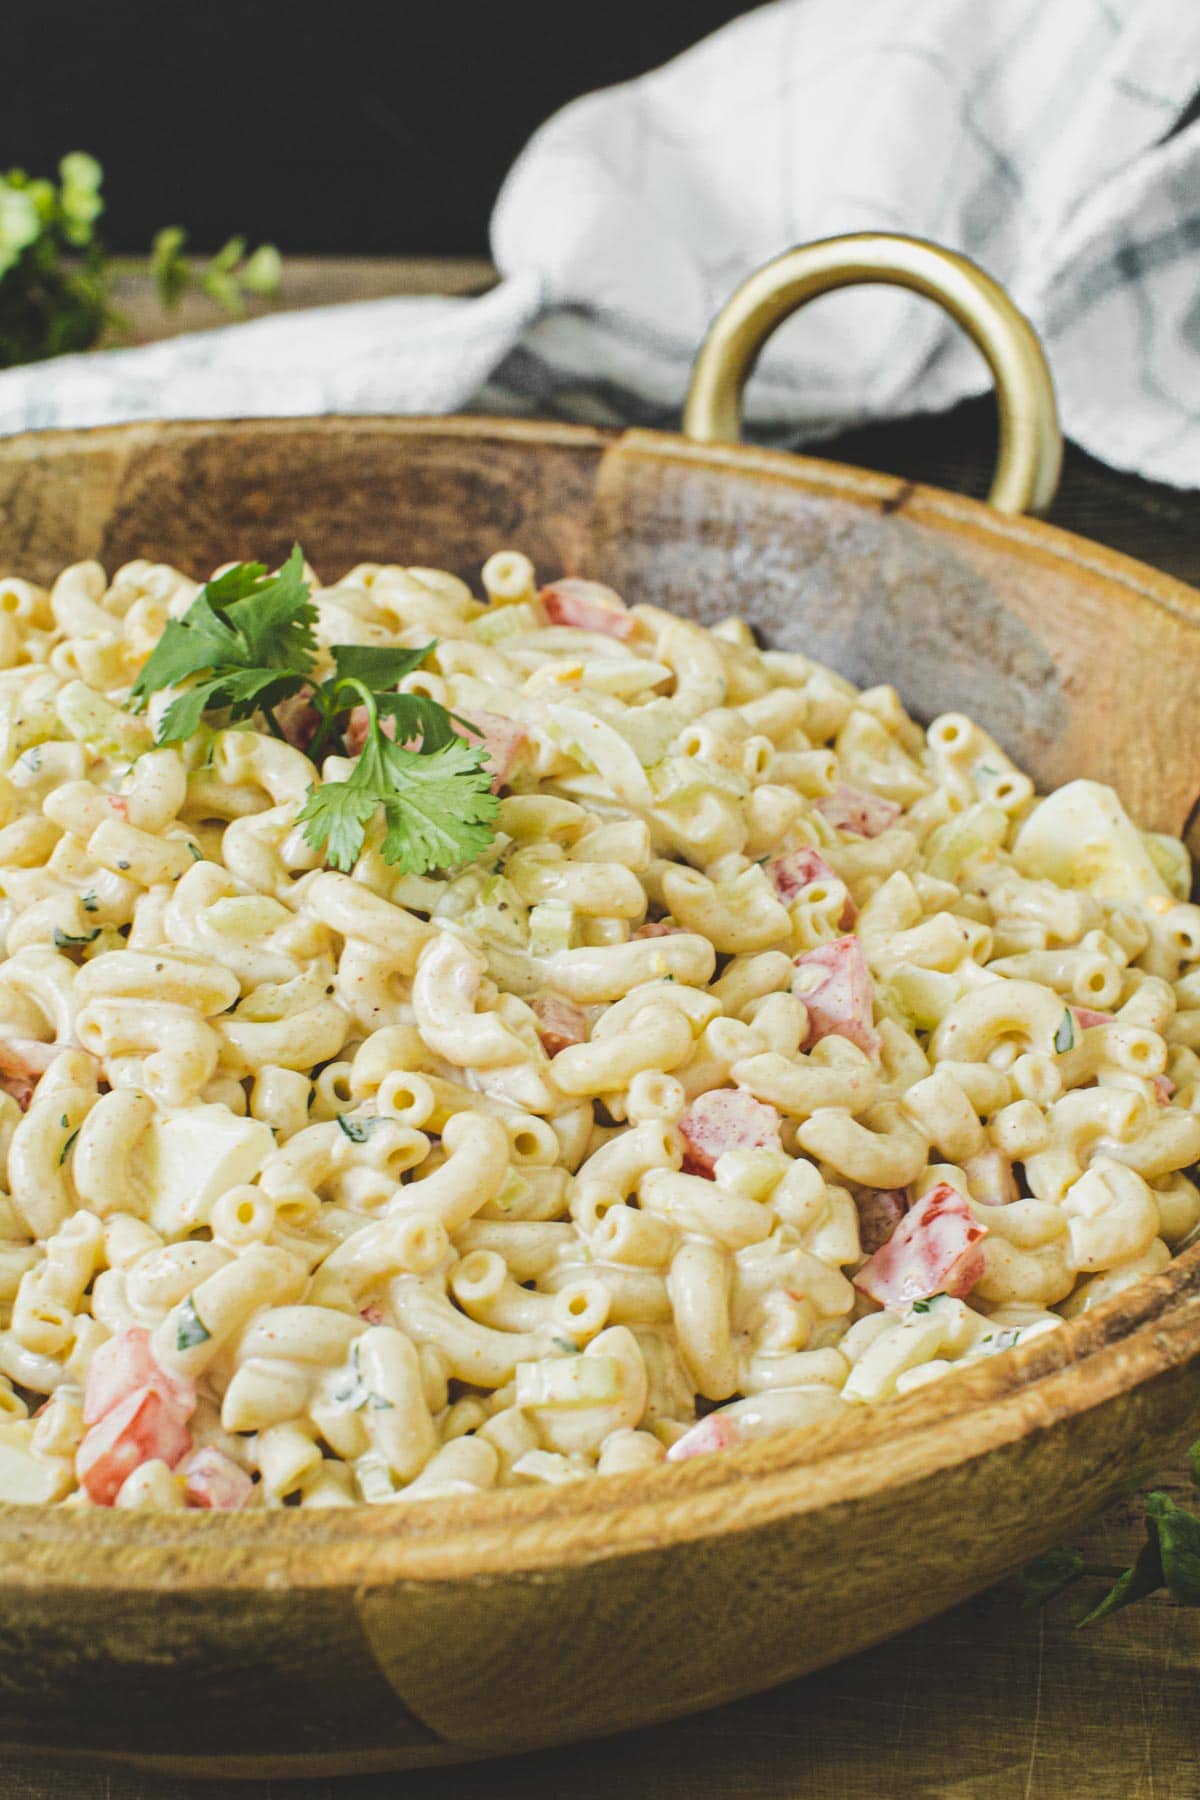 Southern macaroni salad in a wooden bowl topped with fresh parsley.